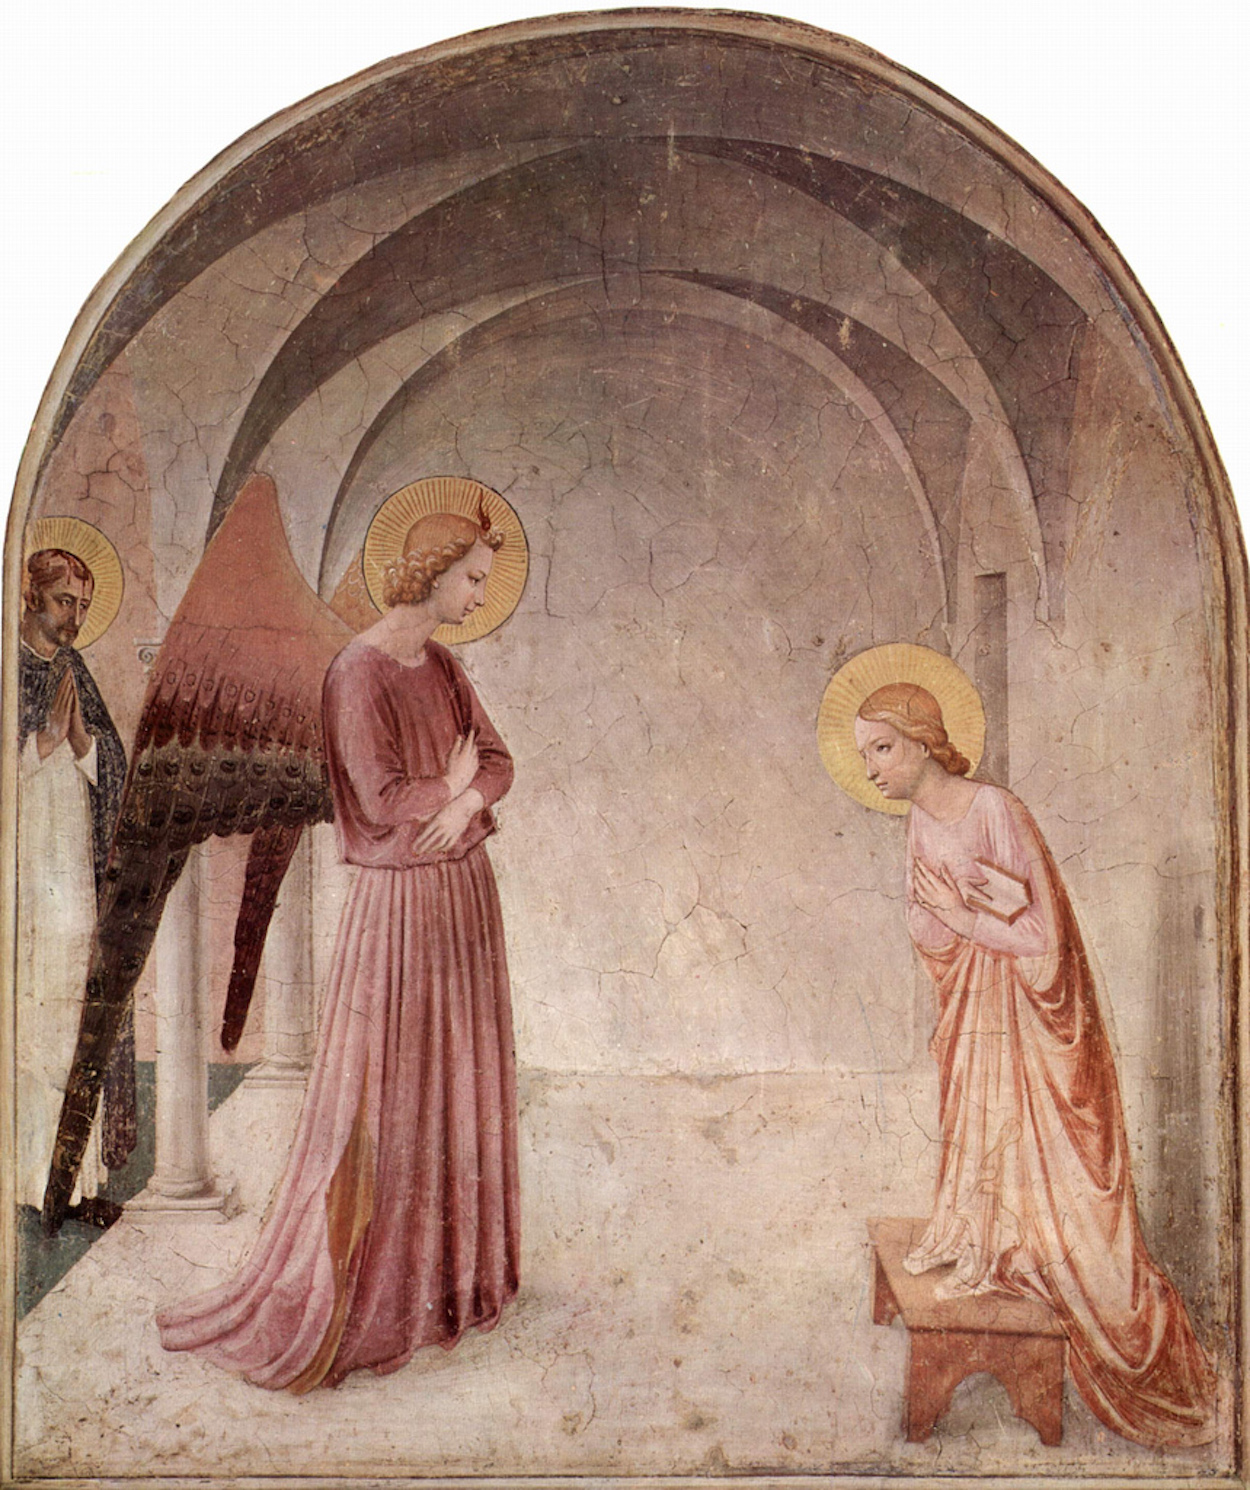 Annunciation by Fra Angelico - c. 1441 - 176 x 148 cm Museo di San Marco